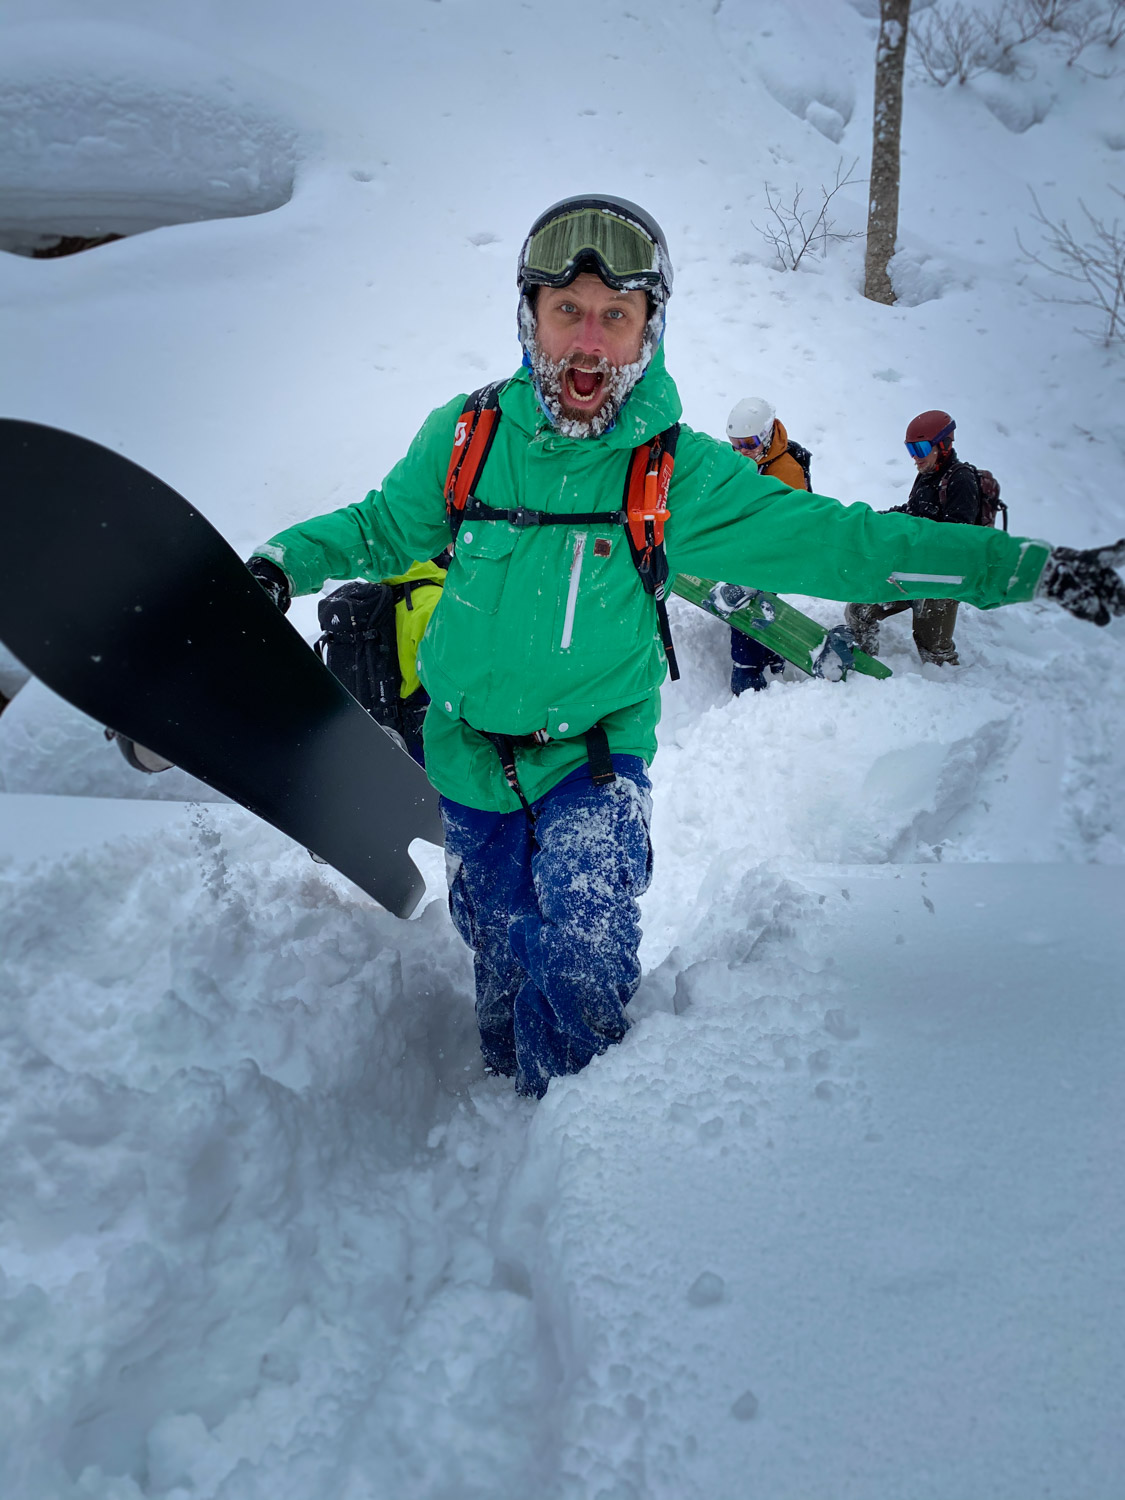 Everywhere you look is powder on this snowboard trip in Japan